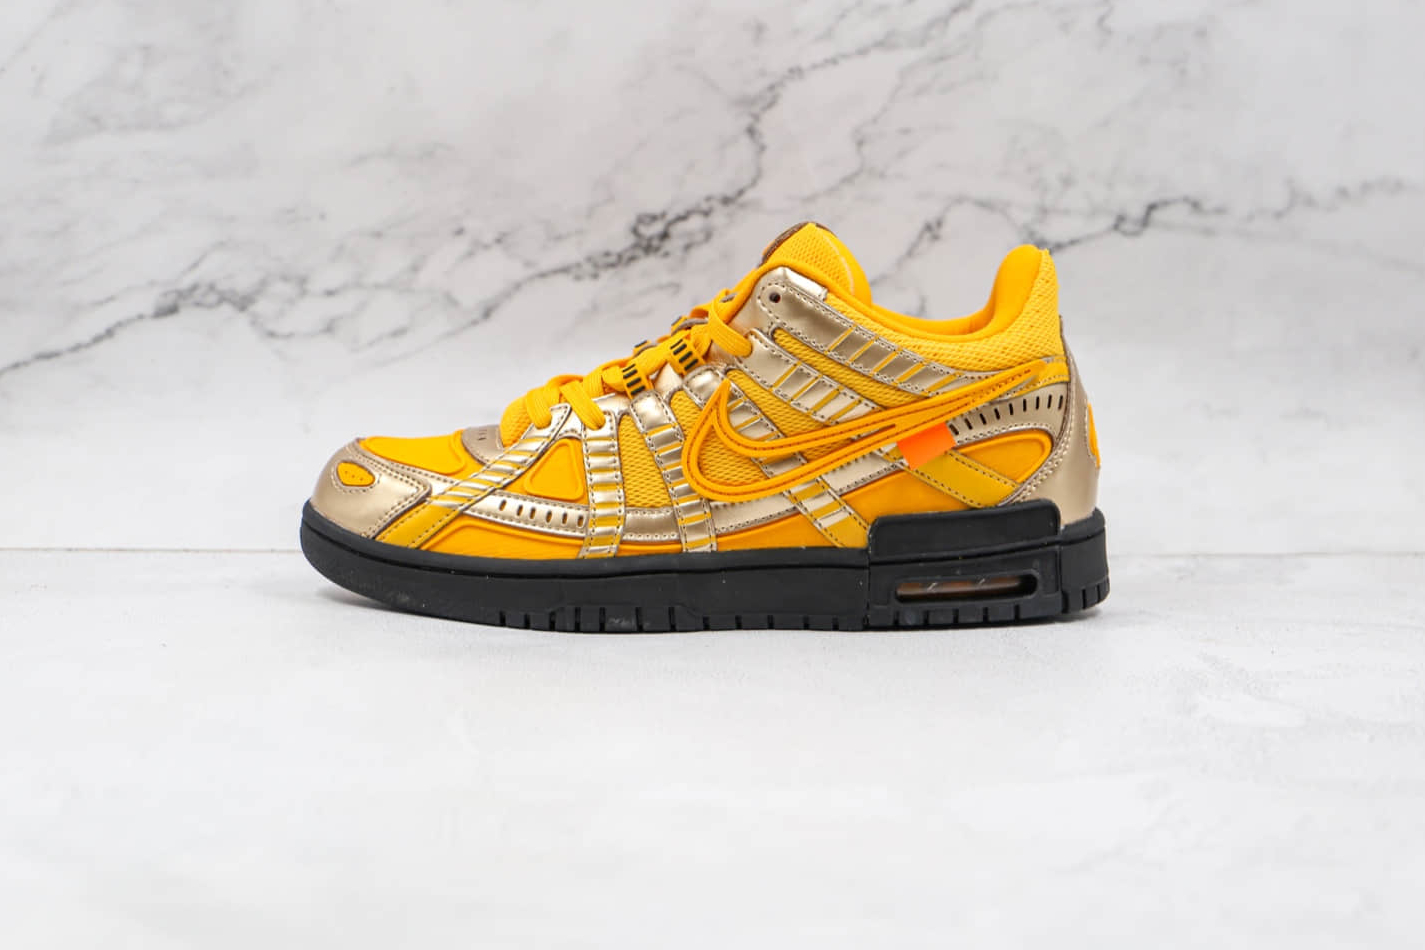 Nike Off-White x Air Rubber Dunk 'University Gold' CU6015-700 - Limited Edition Sneakers